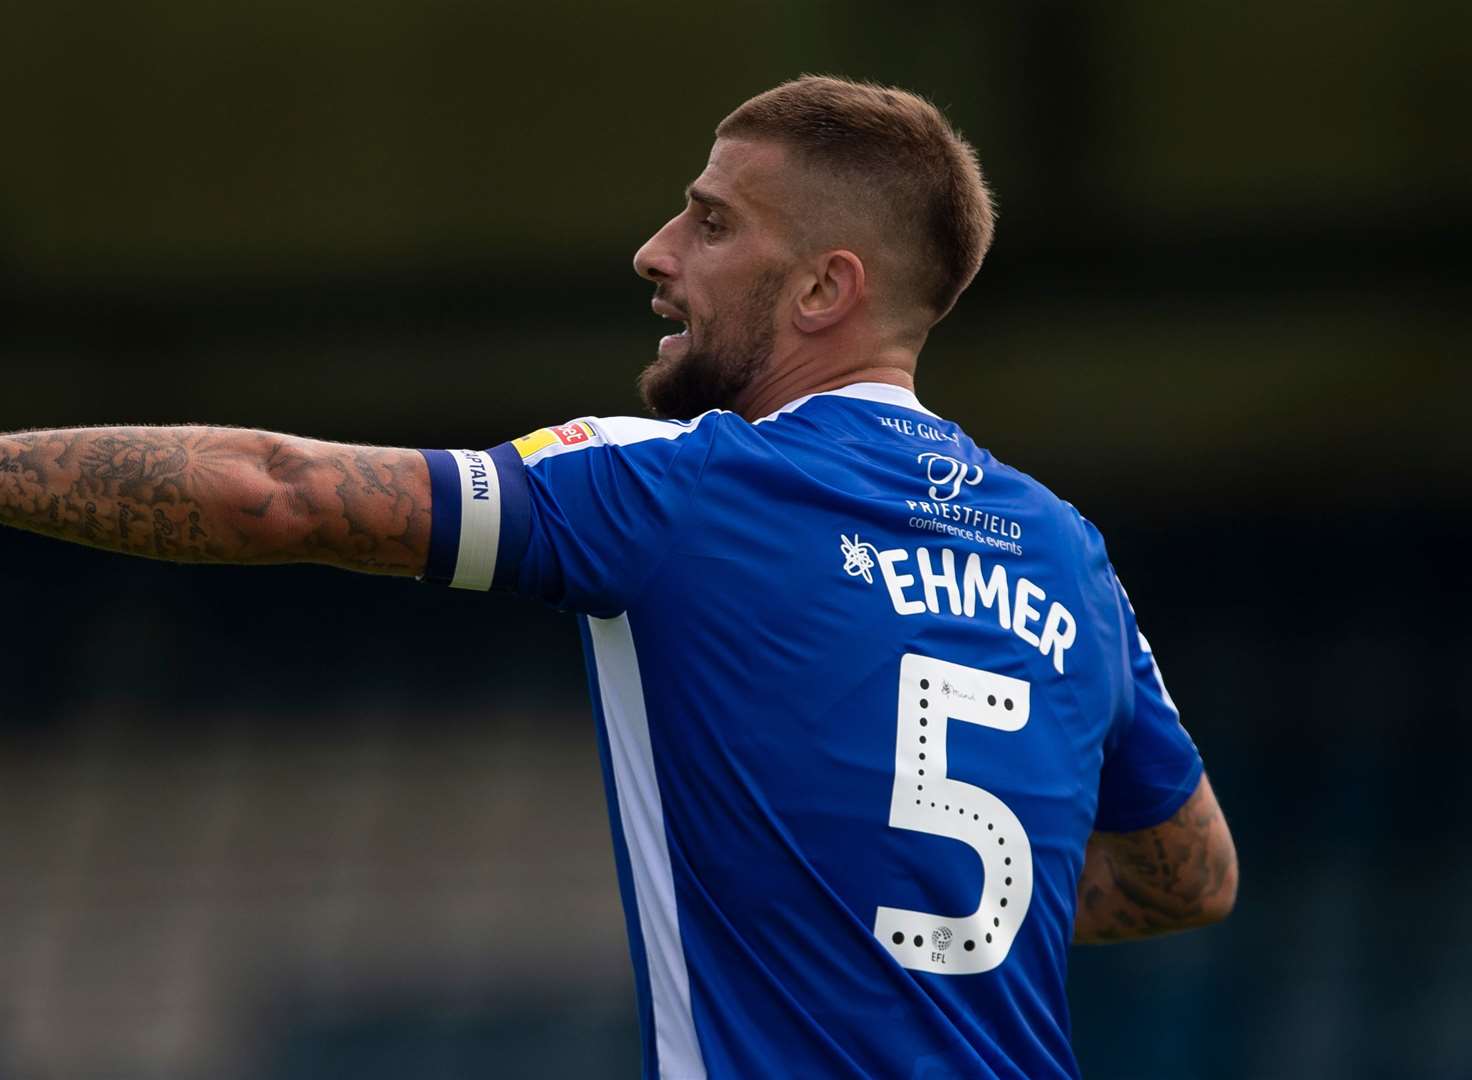 Max Ehmer captains the Gills this season and keeps the no.5 shirt Picture: Ady Kerry